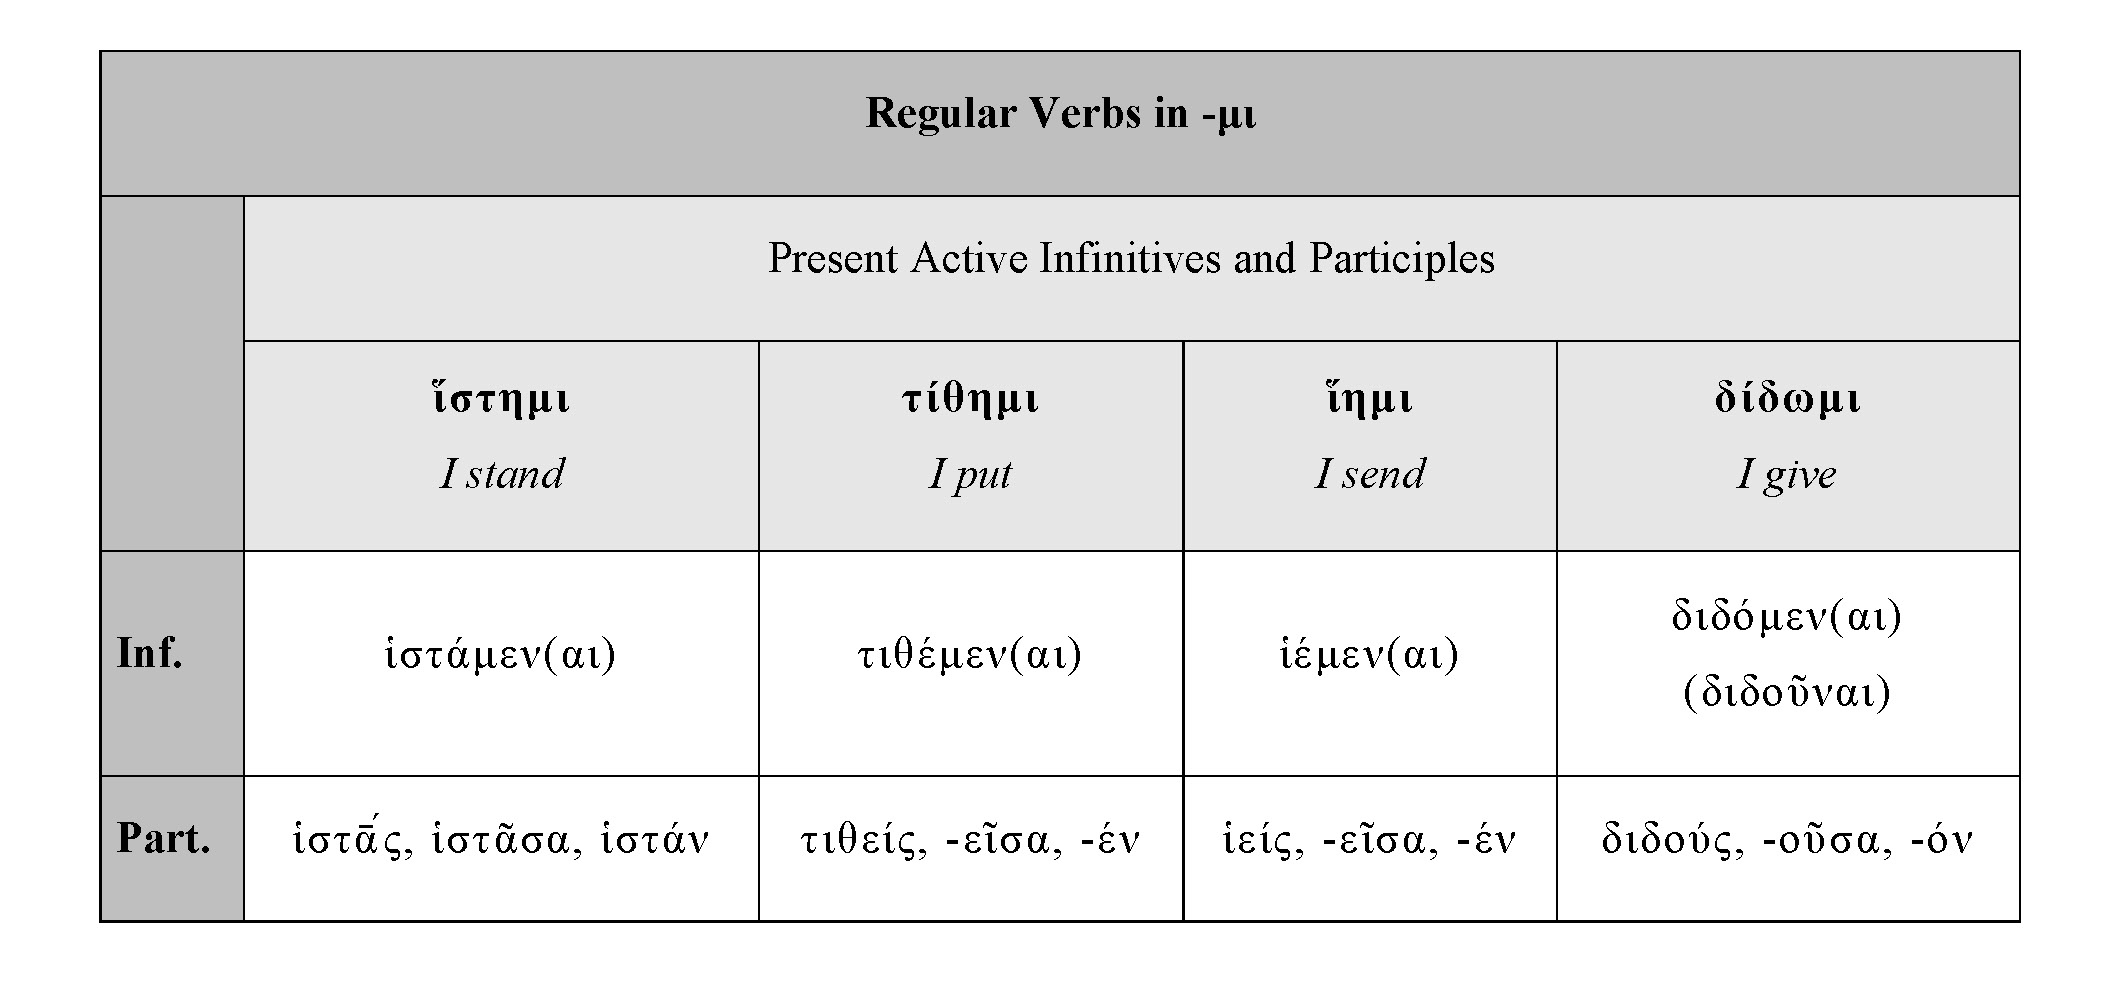 HOMERIC VERBS: -ΜΙ PRESENT ACTIVE INFINITIVES AND PARTICIPLES